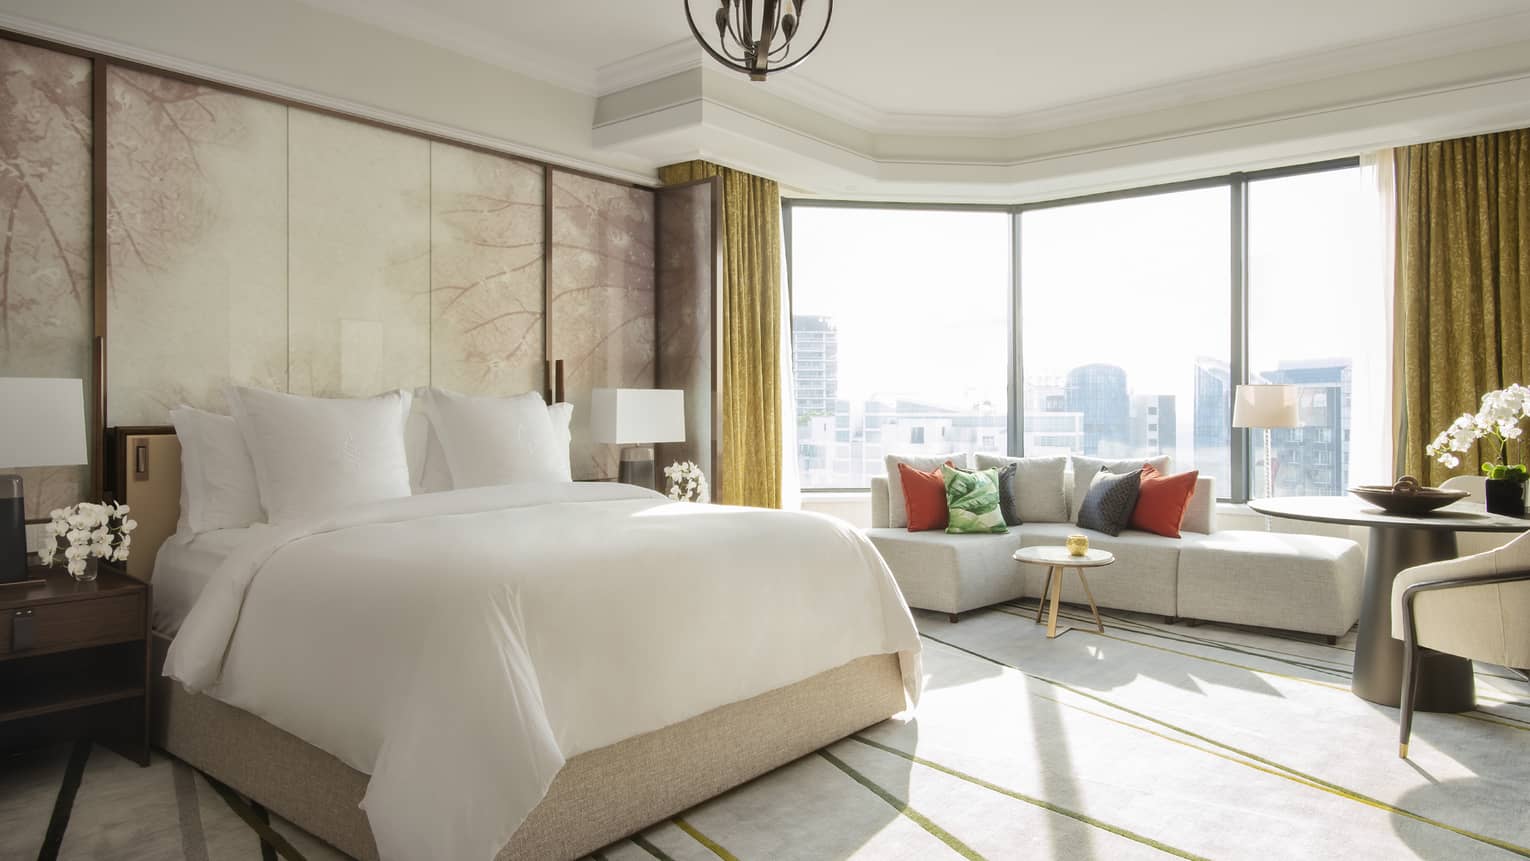 Royal Suite bedroom with floor-to-ceiling windows with a view of the city